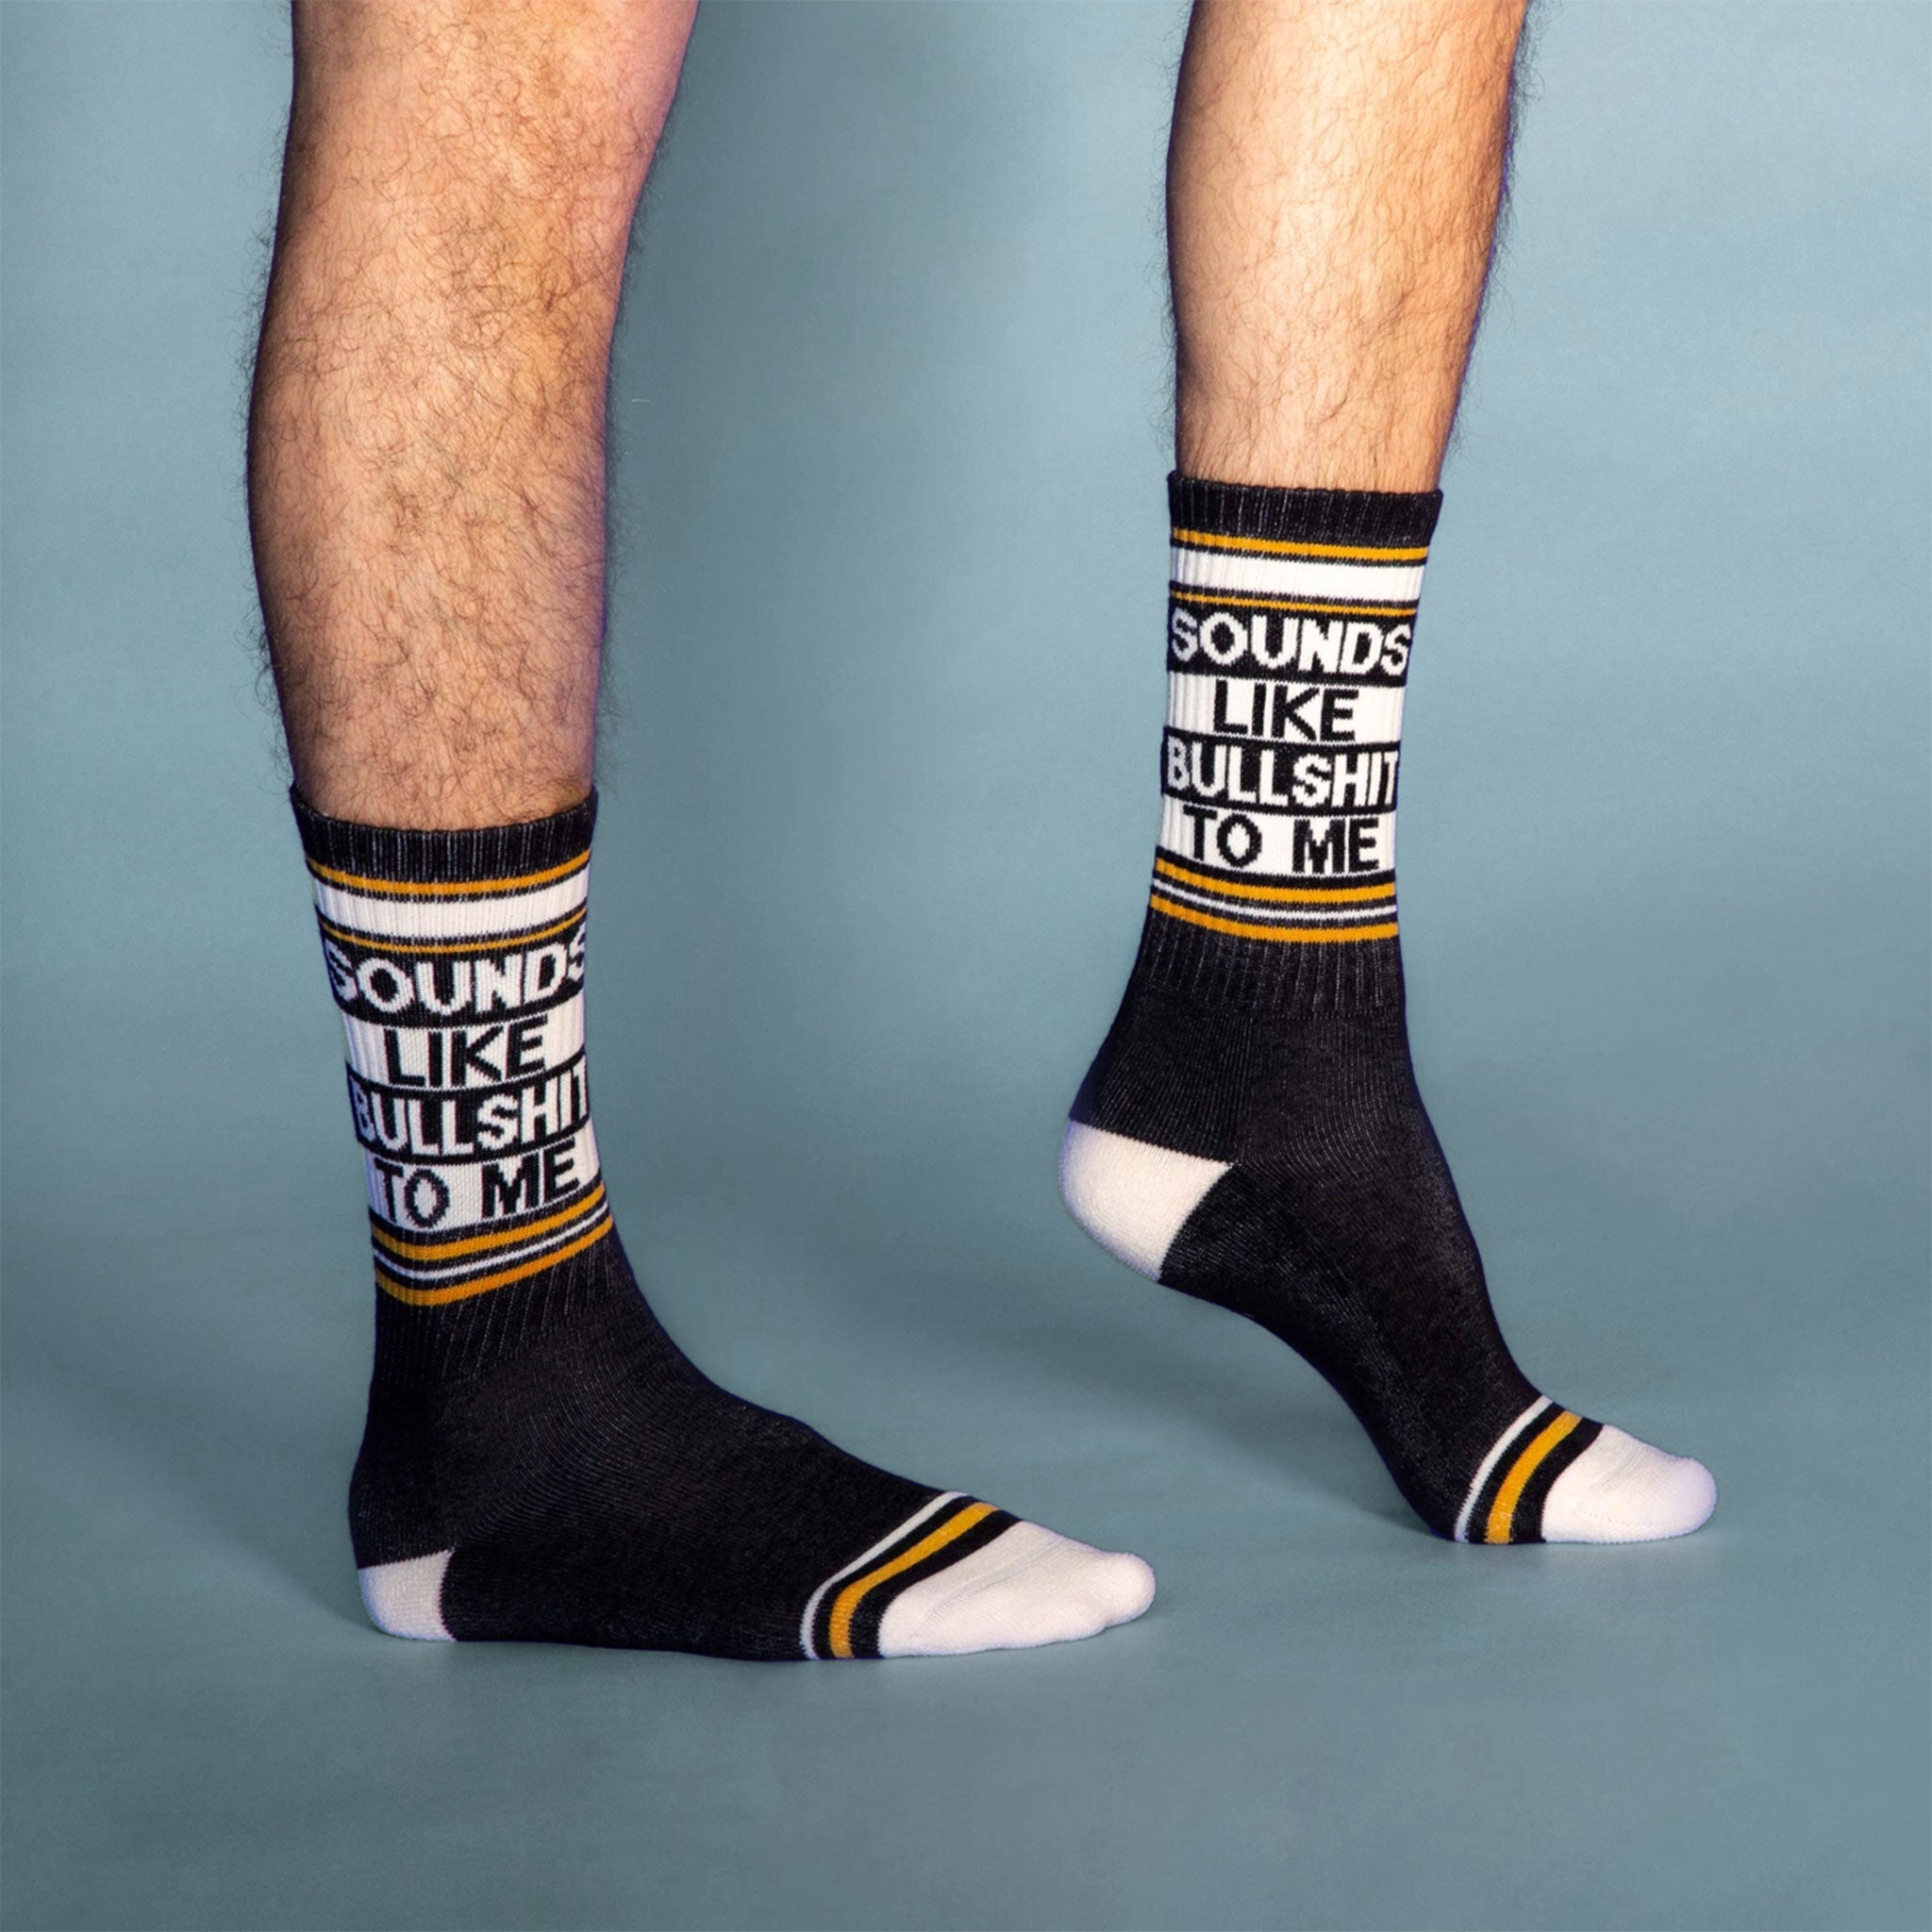 On a blue background is a model wearing a pair of black socks with yellow and white details along with text that reads, &quot;Sounds Like Bullshit To Me&quot;.